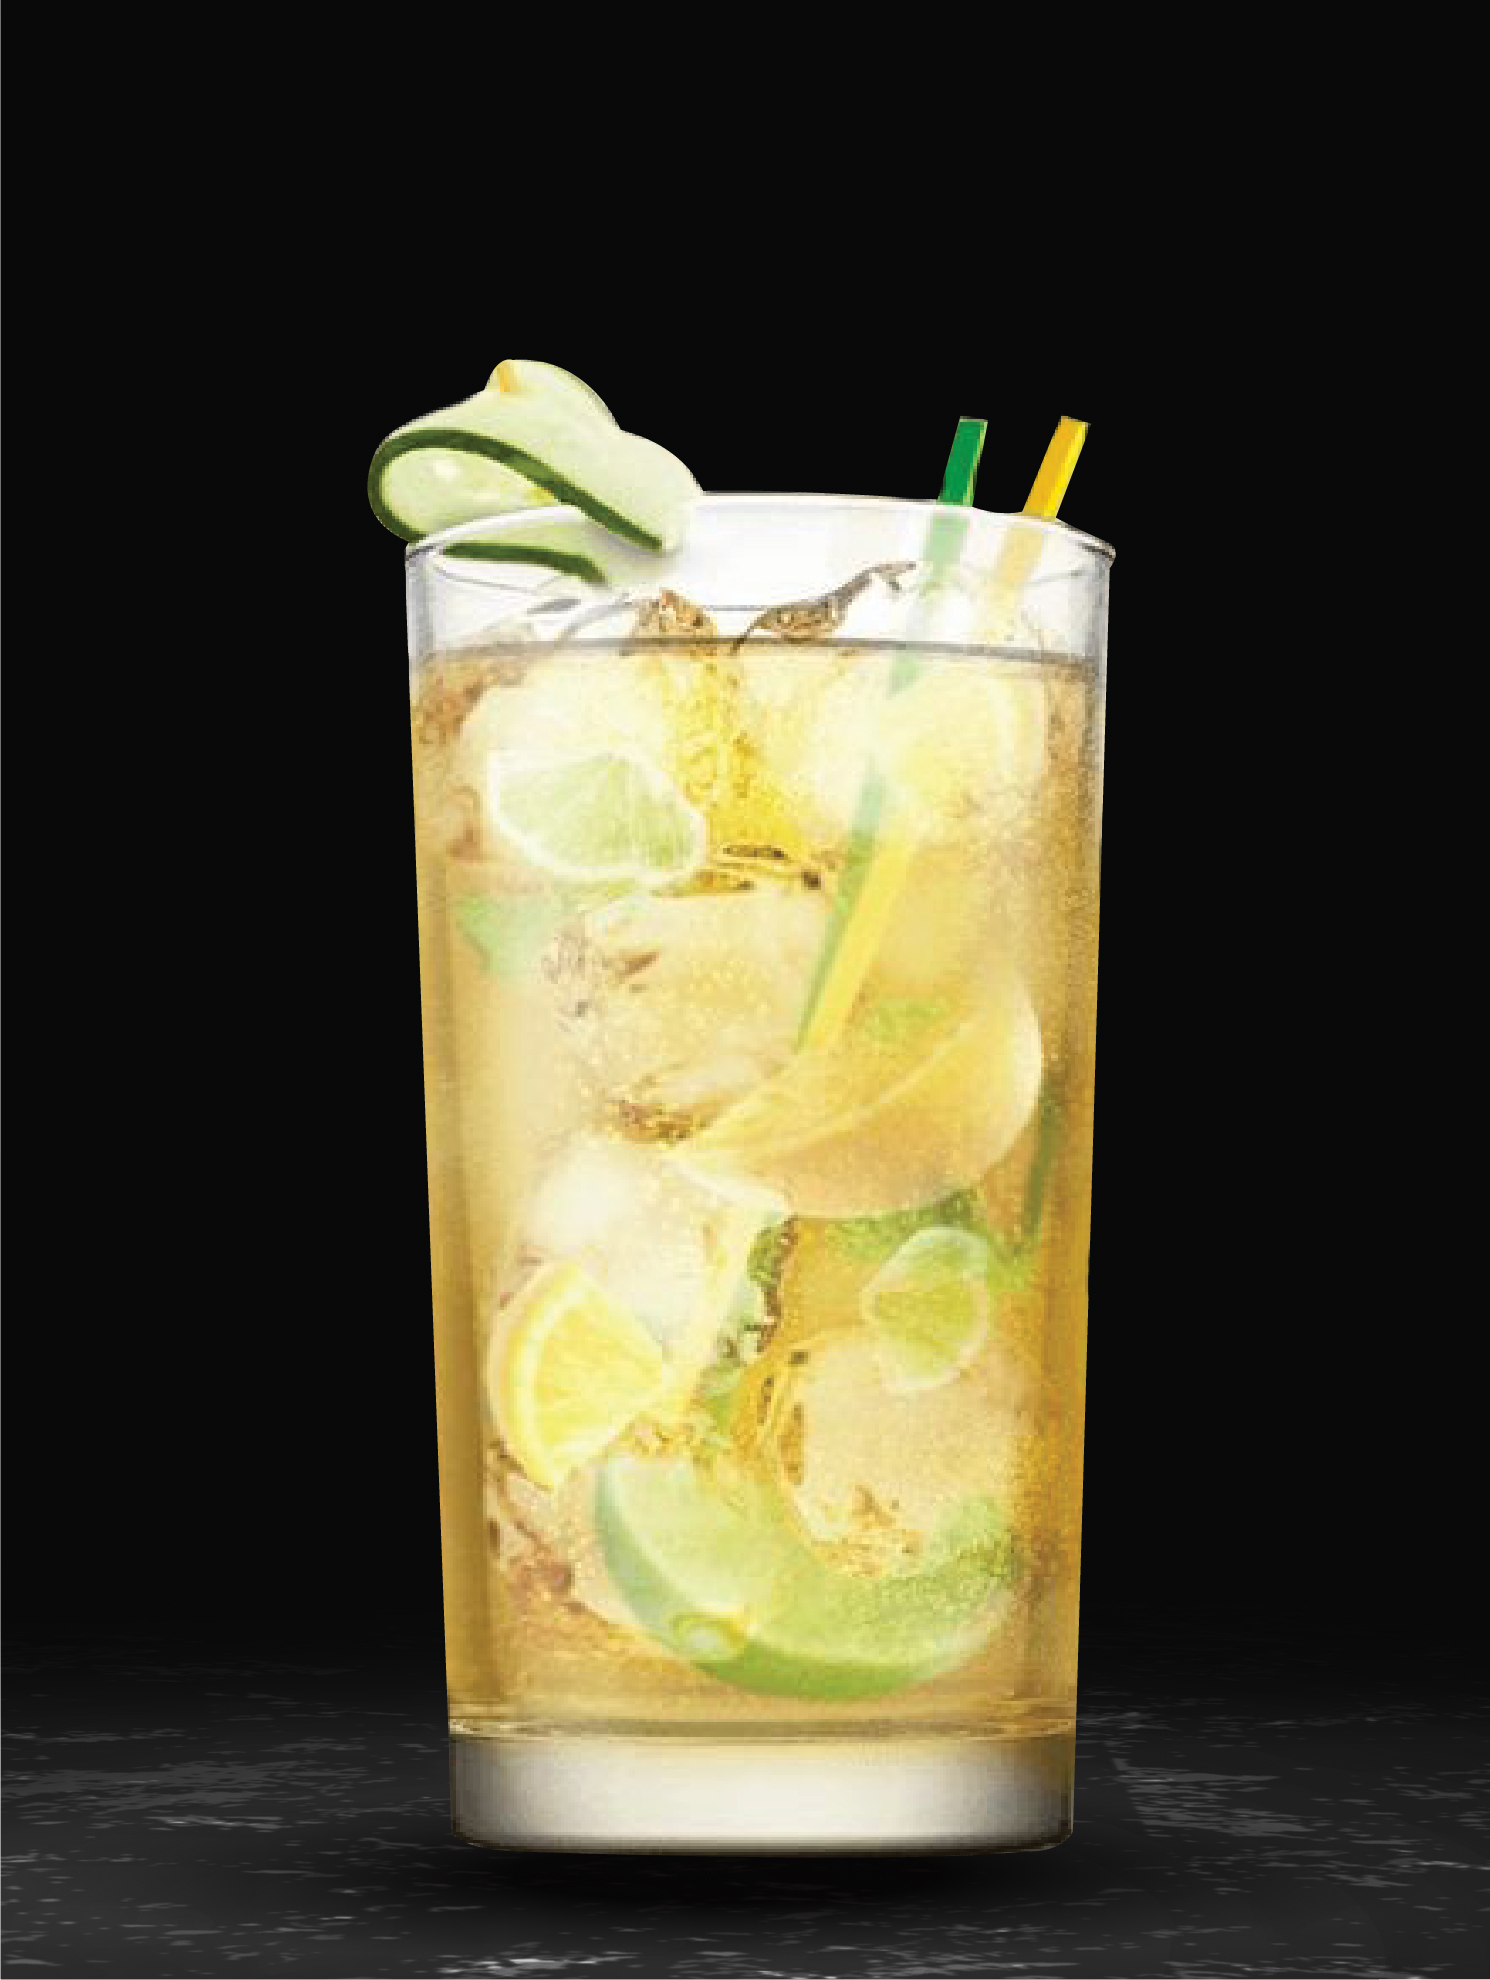 PIMM’S CUP